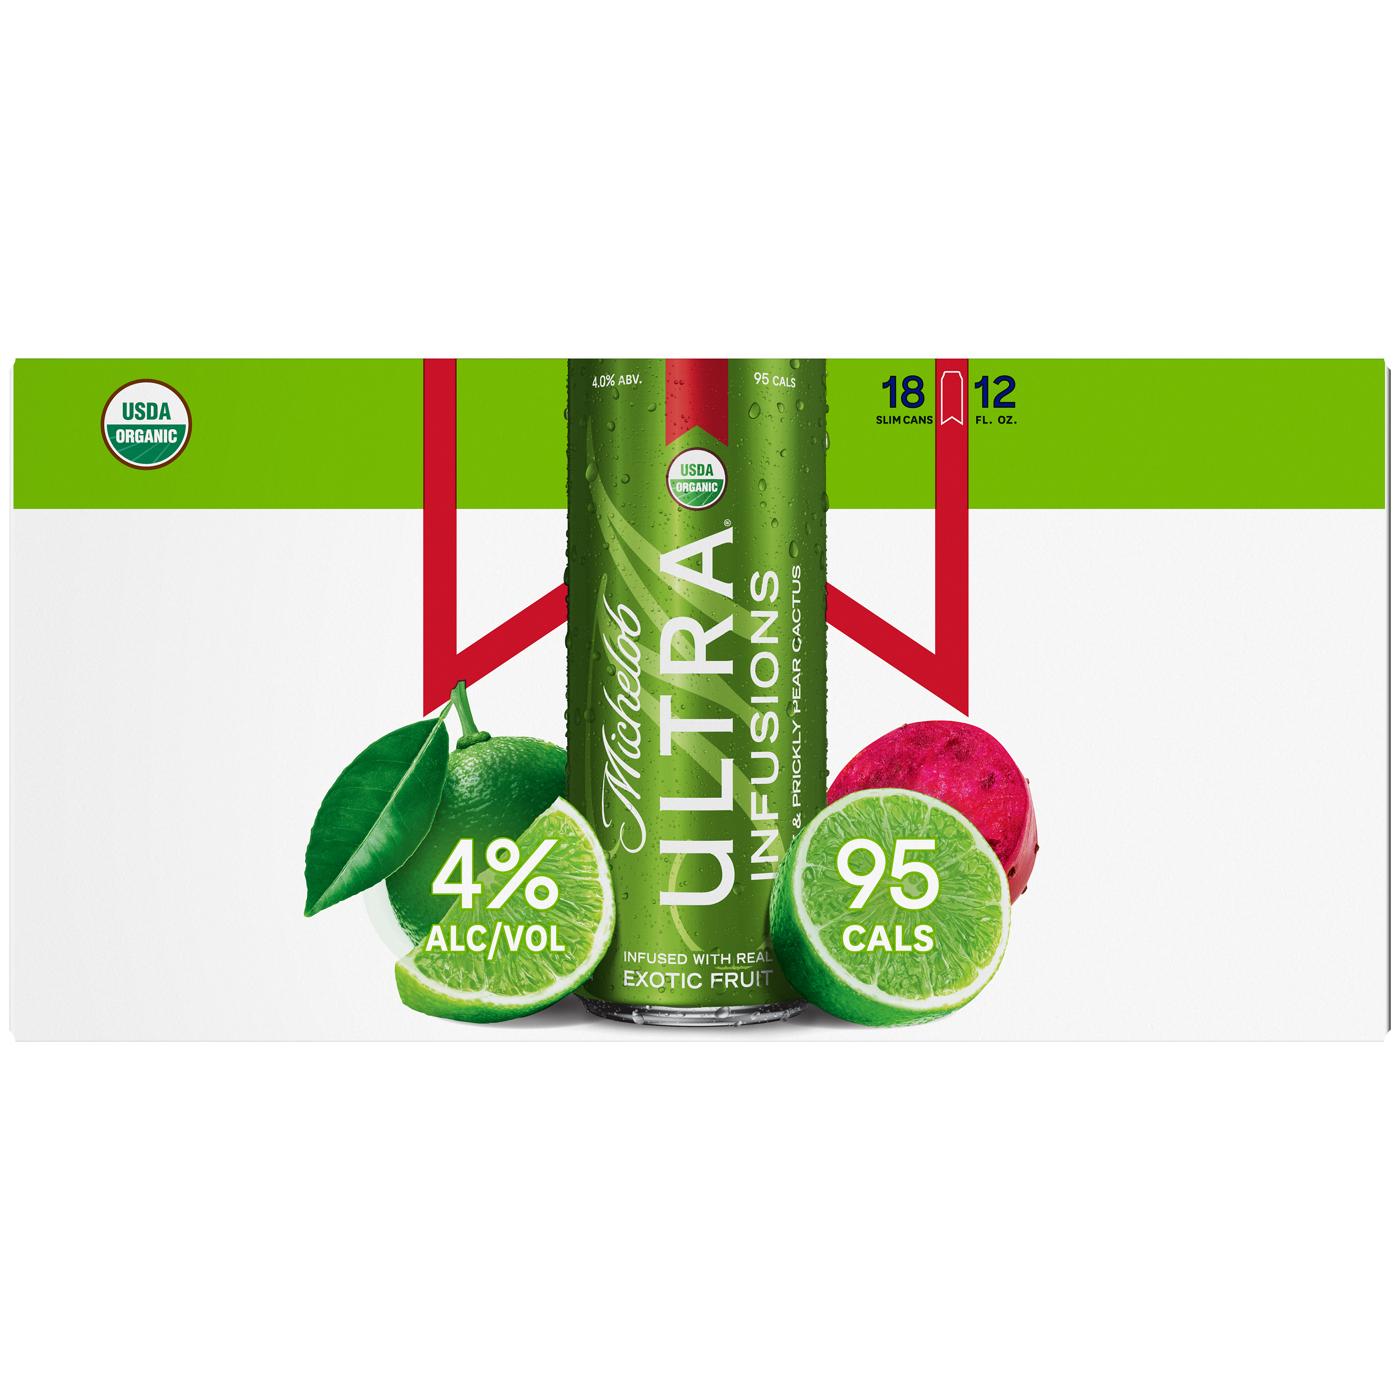 Michelob Ultra Lime Cactus Beer 12 oz Cans; image 2 of 2